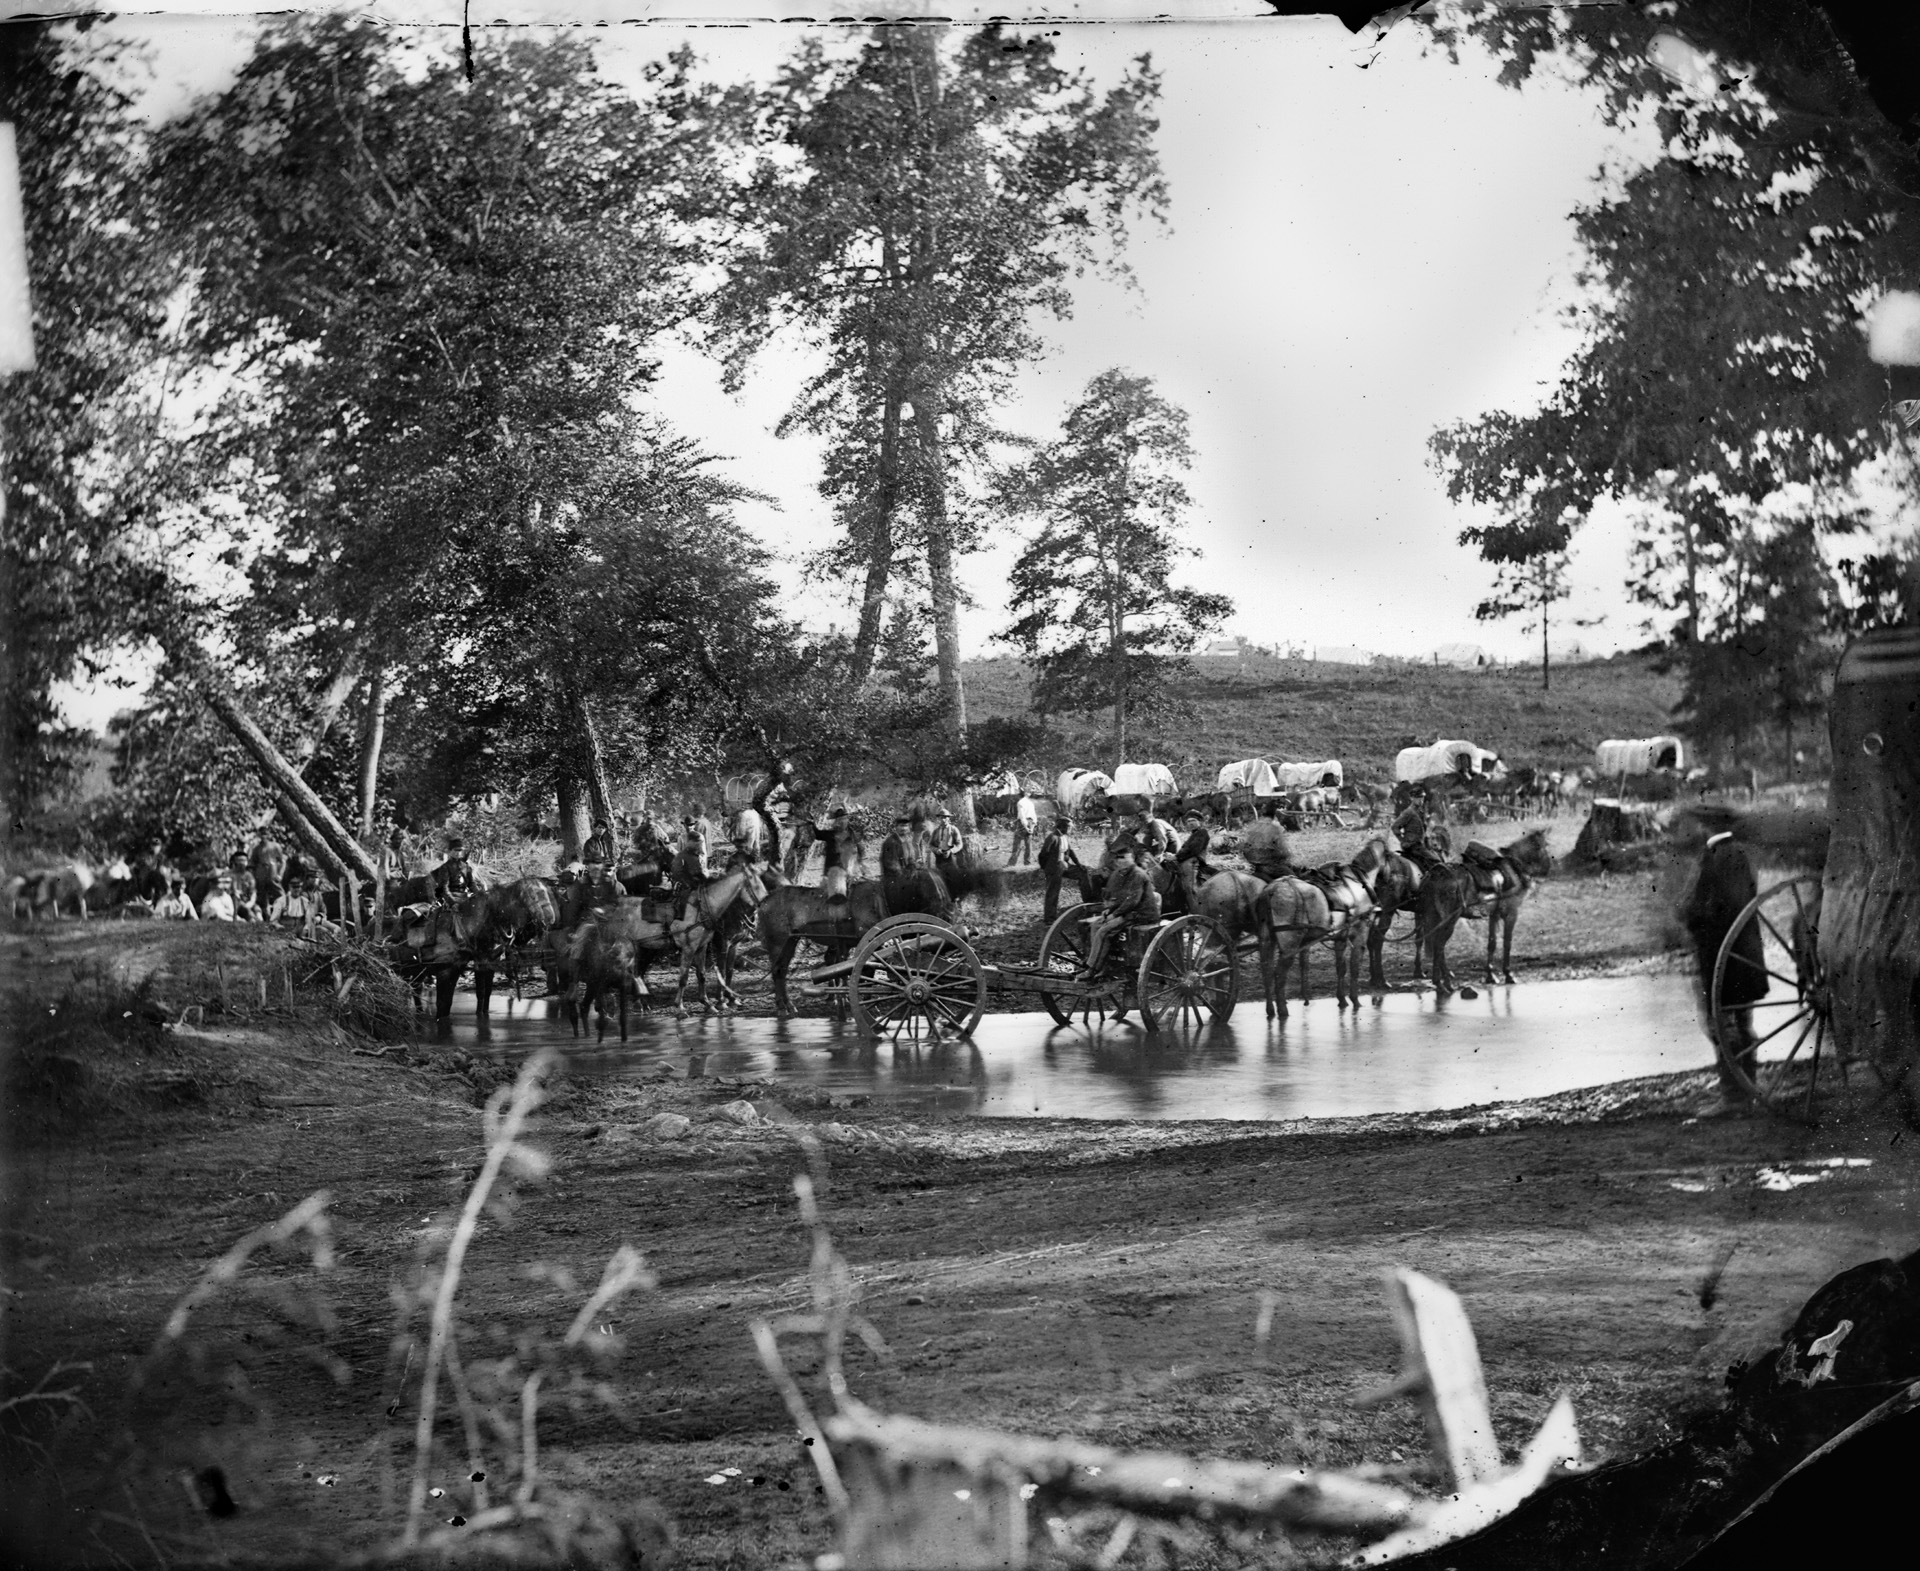 A Federal battery fords a tributary of the Rappahannock on the day of battle. At the outset of the campaign, Jackson hoped to defeat the newly established Federal Army of Virginia one corps at a time.